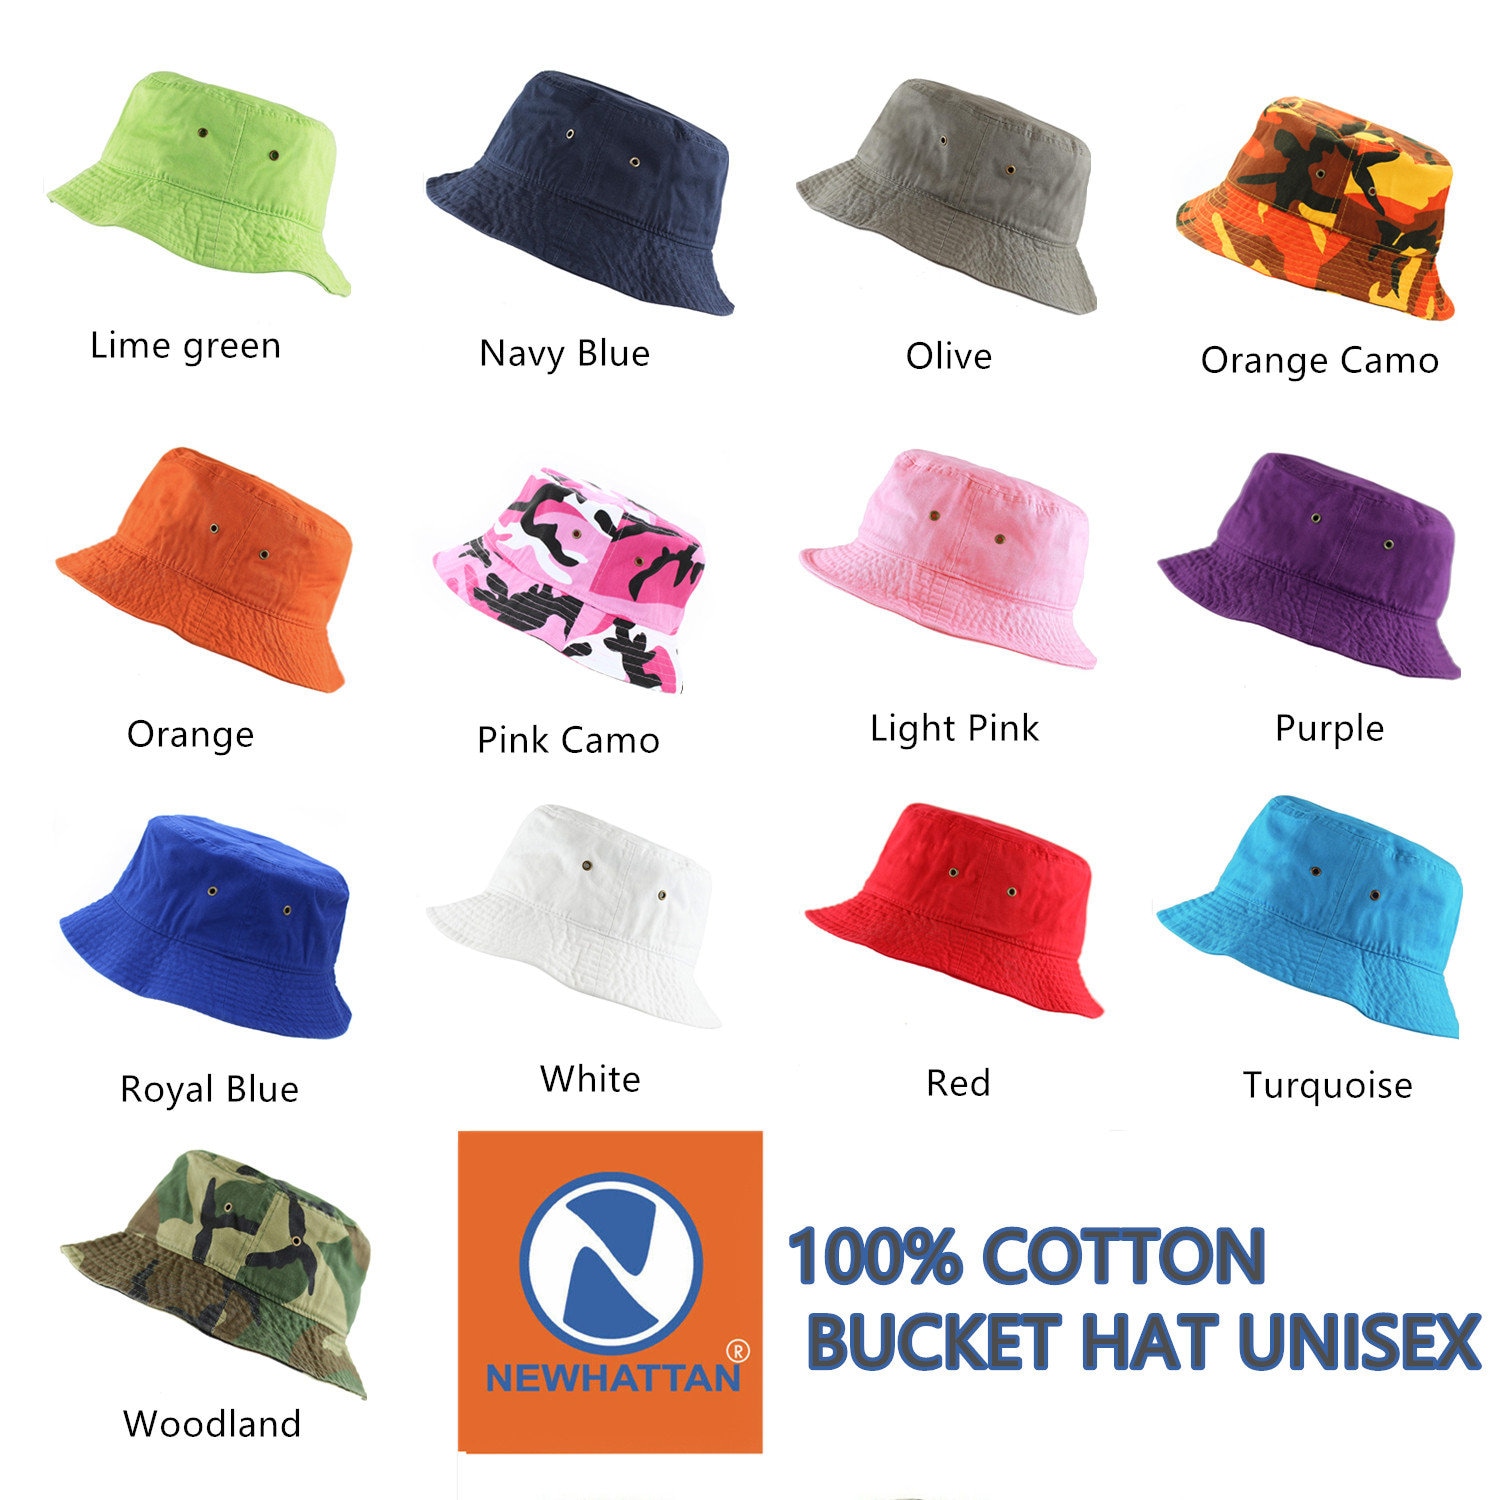 Newhattan Bucket Hats, Unisex, Solid Colors 100% Cotton, Camos